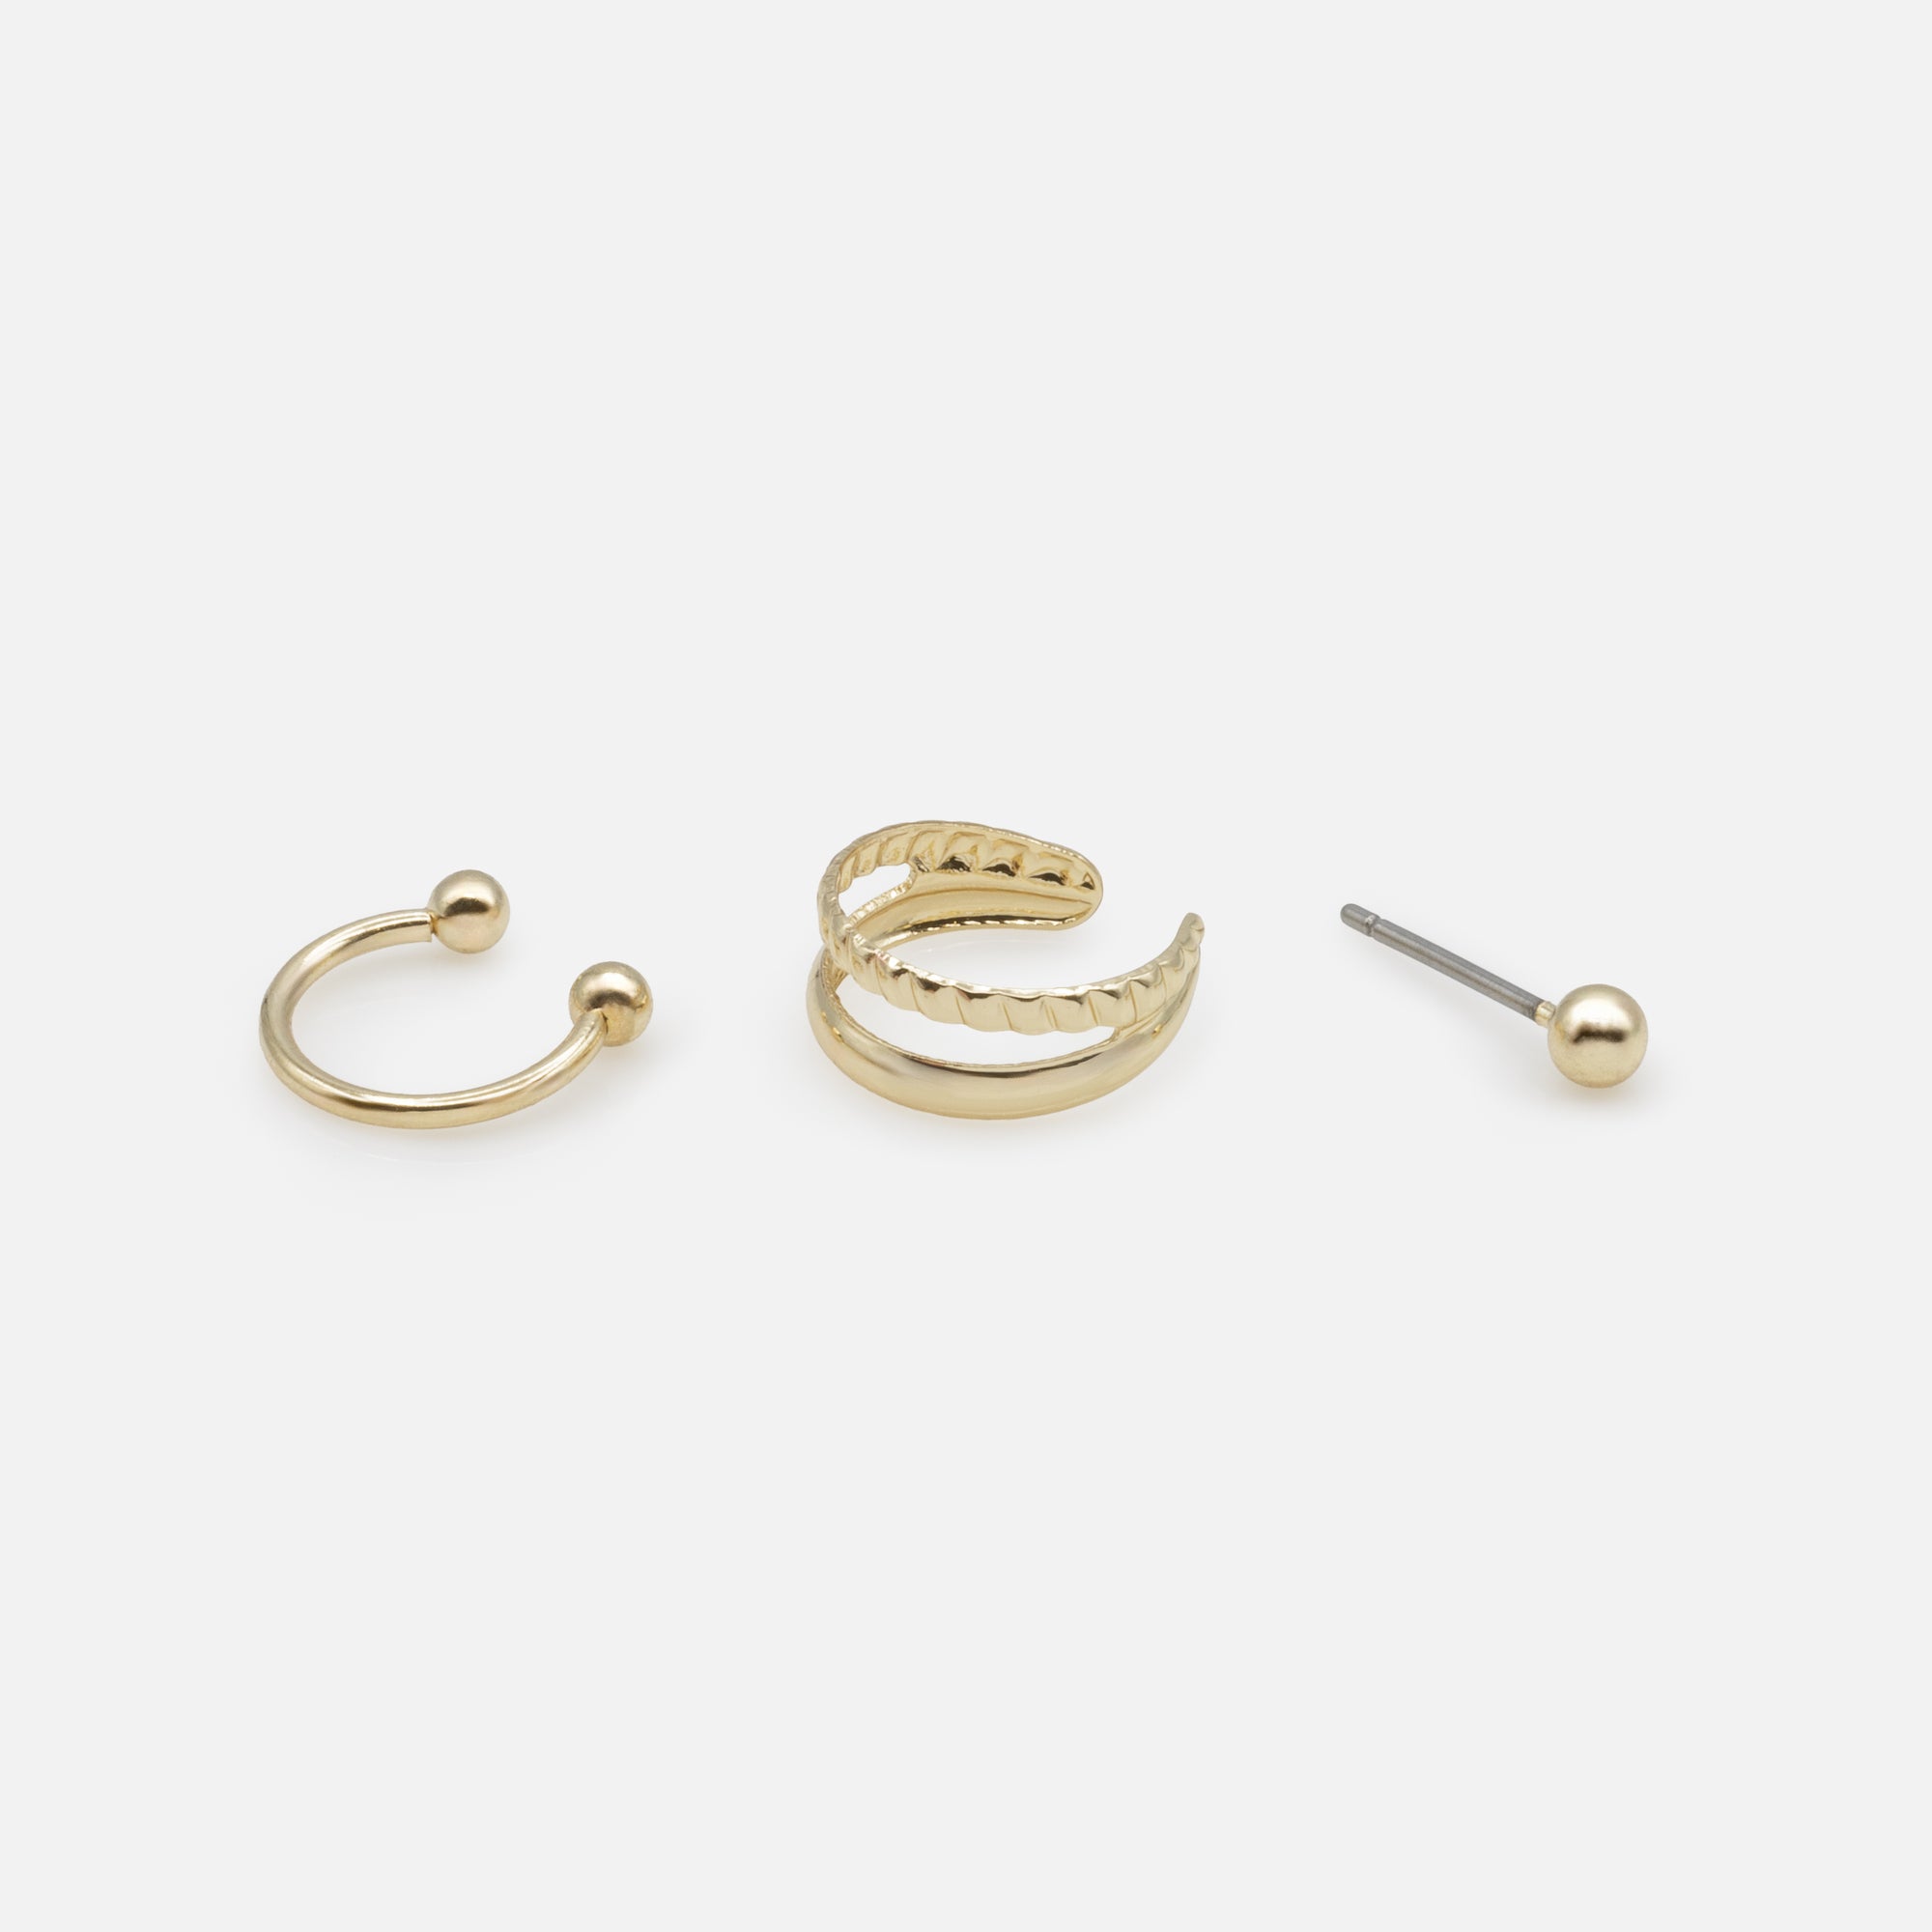 Set of two gold cuffs and earrings